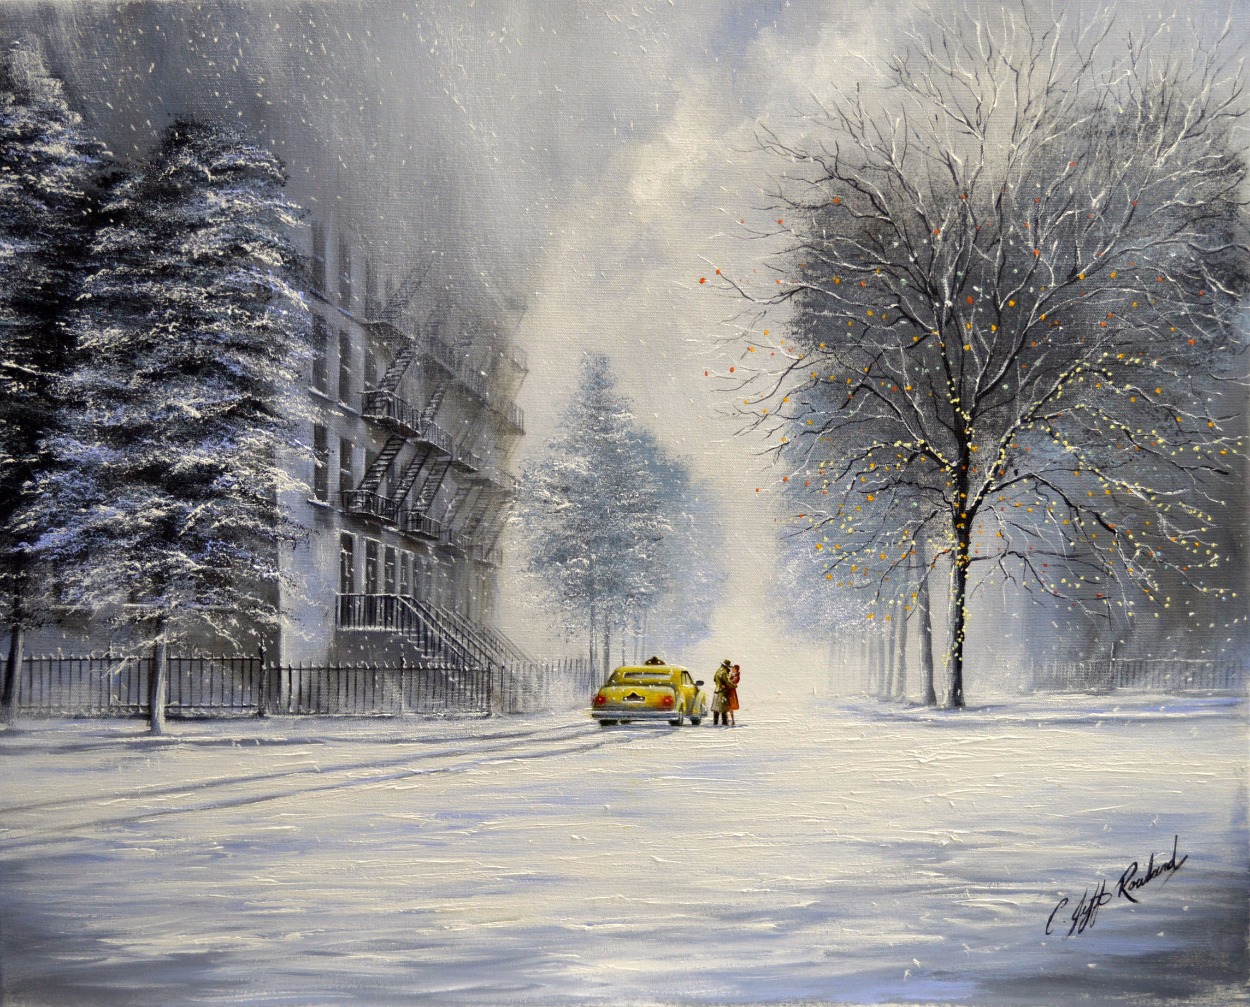 On That Cold Christmas Eve by Jeff Rowland, Love | Romance | Couple | New York | Nostalgic | Water